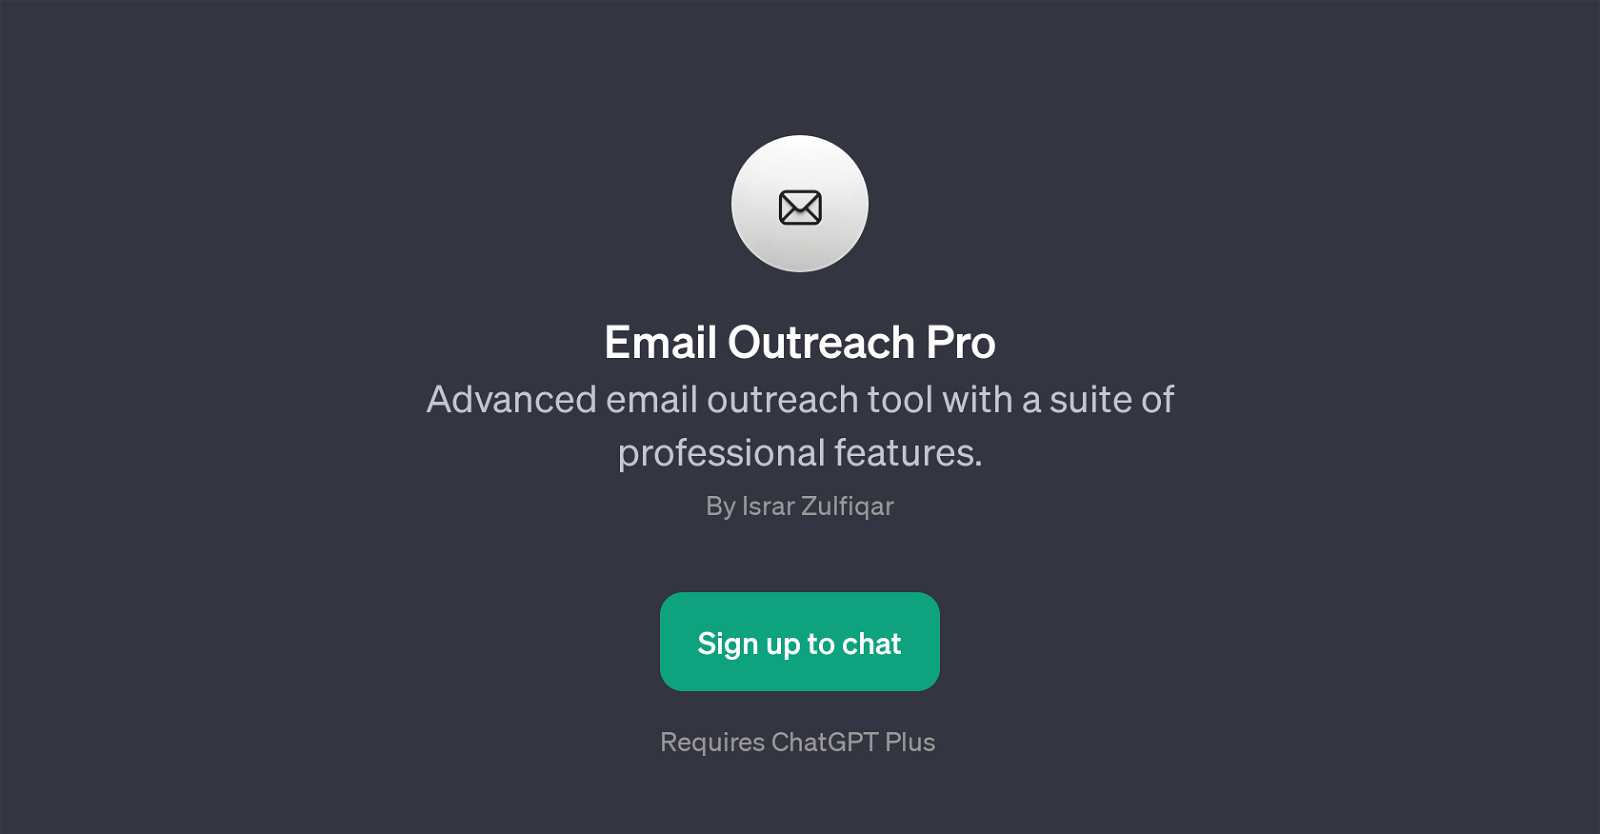 Email Outreach Pro website